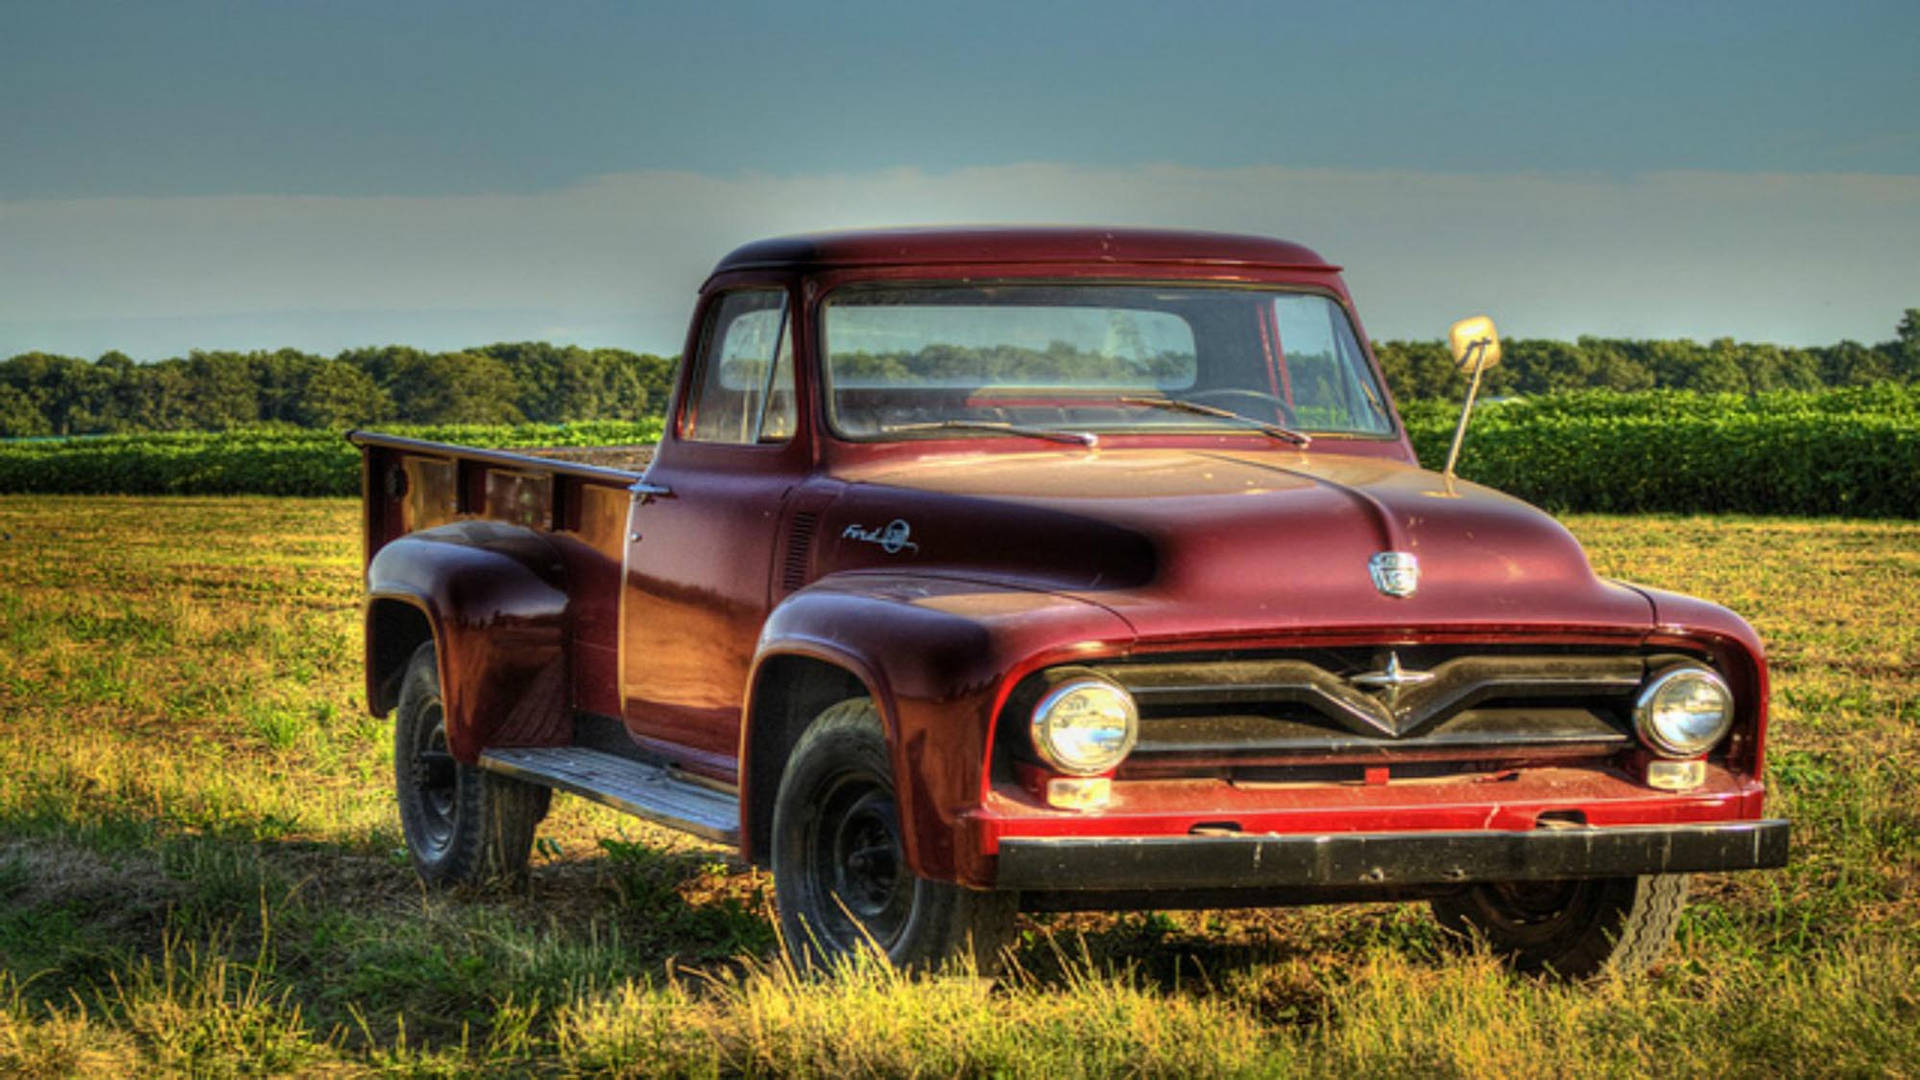 1953 Red Old Ford Truck Wallpaper